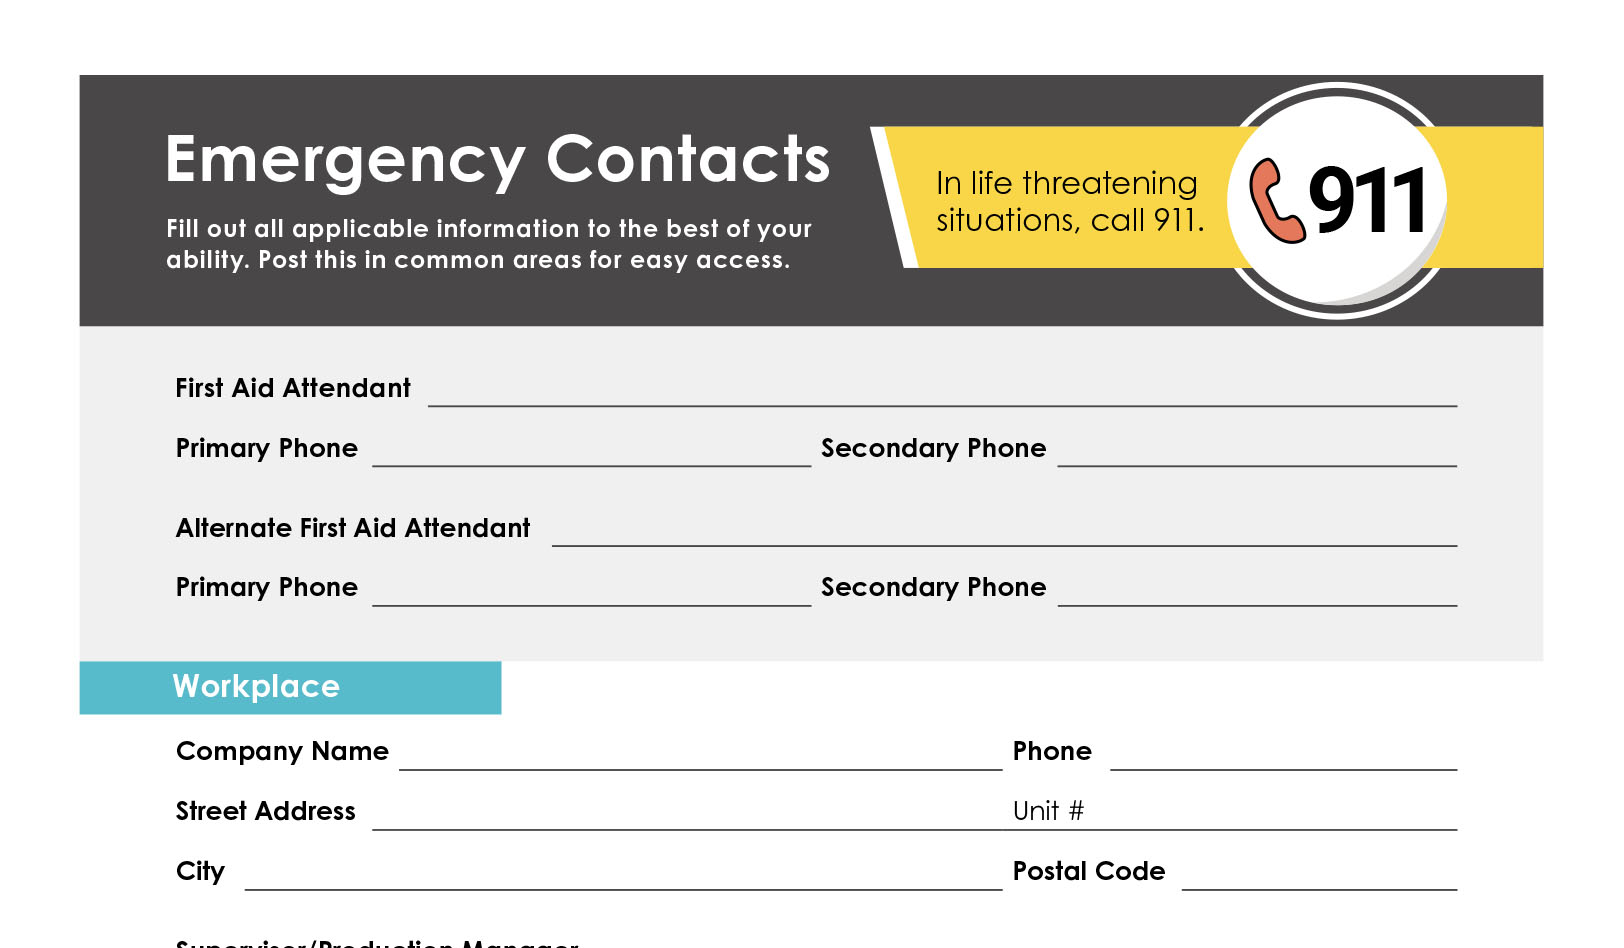 Print_emergency-contact-form_fillable_0722